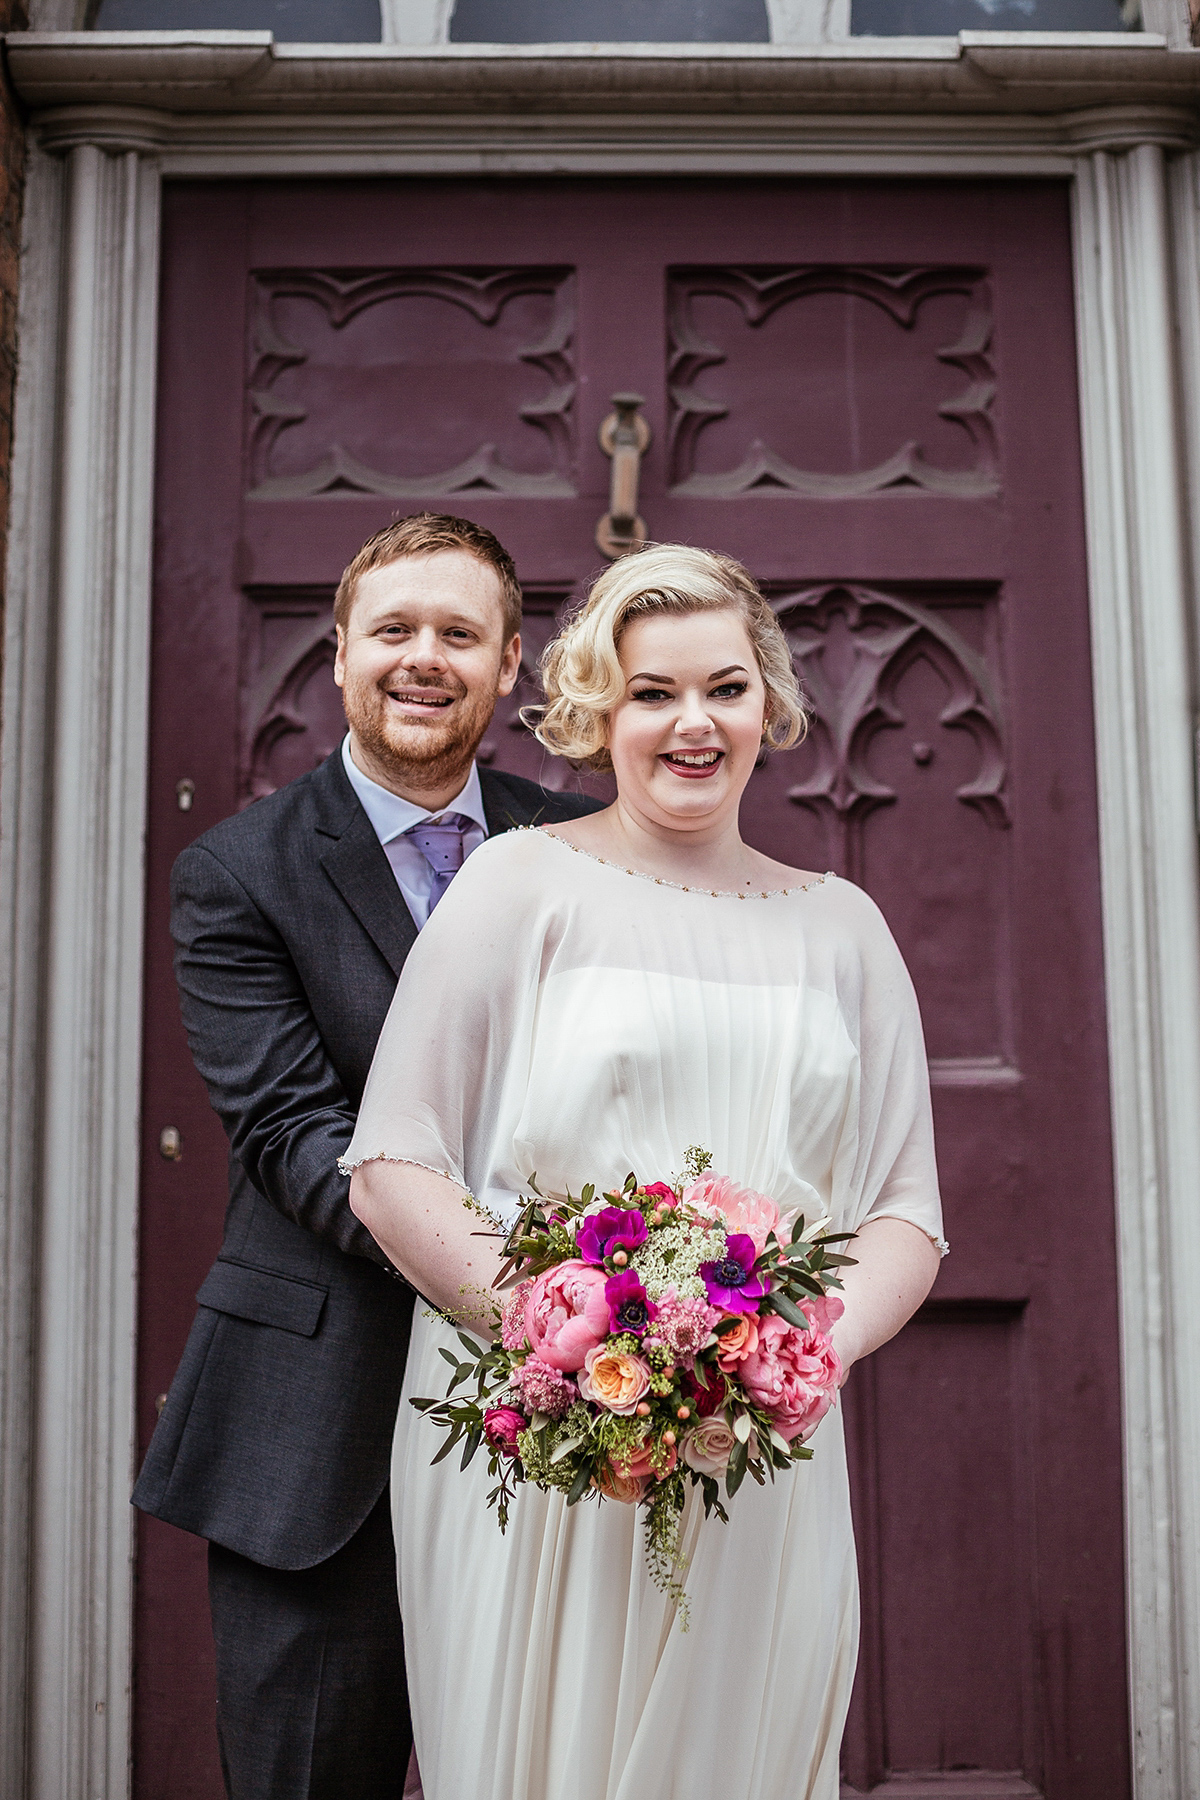 Daisy wears a Jenny Packham gown for her modern, stylish and colourful Manchester city wedding. Photography by Cassandra Lane.